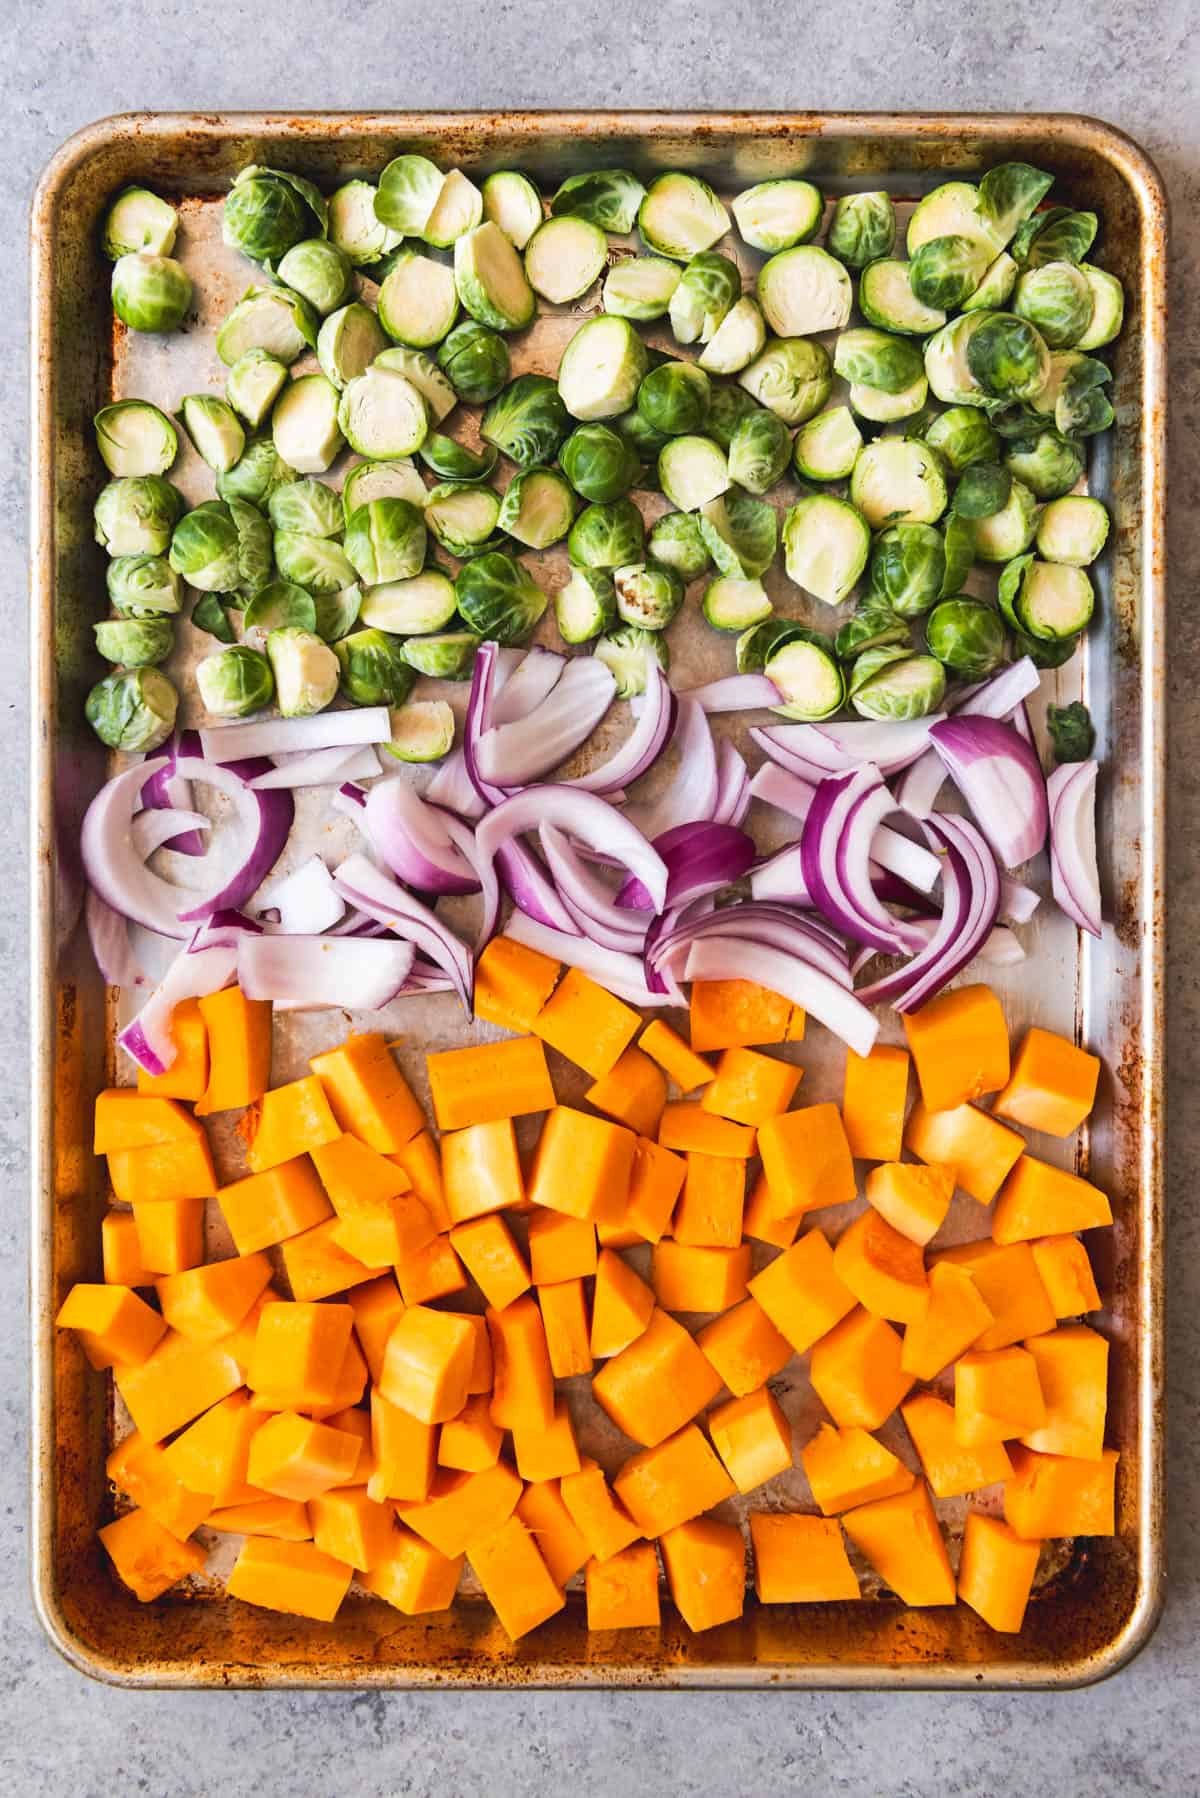 An image of cubed butternut squash, sliced red onion, and brussels sprouts on a baking sheet to be roasted for a delicious Fall salad.